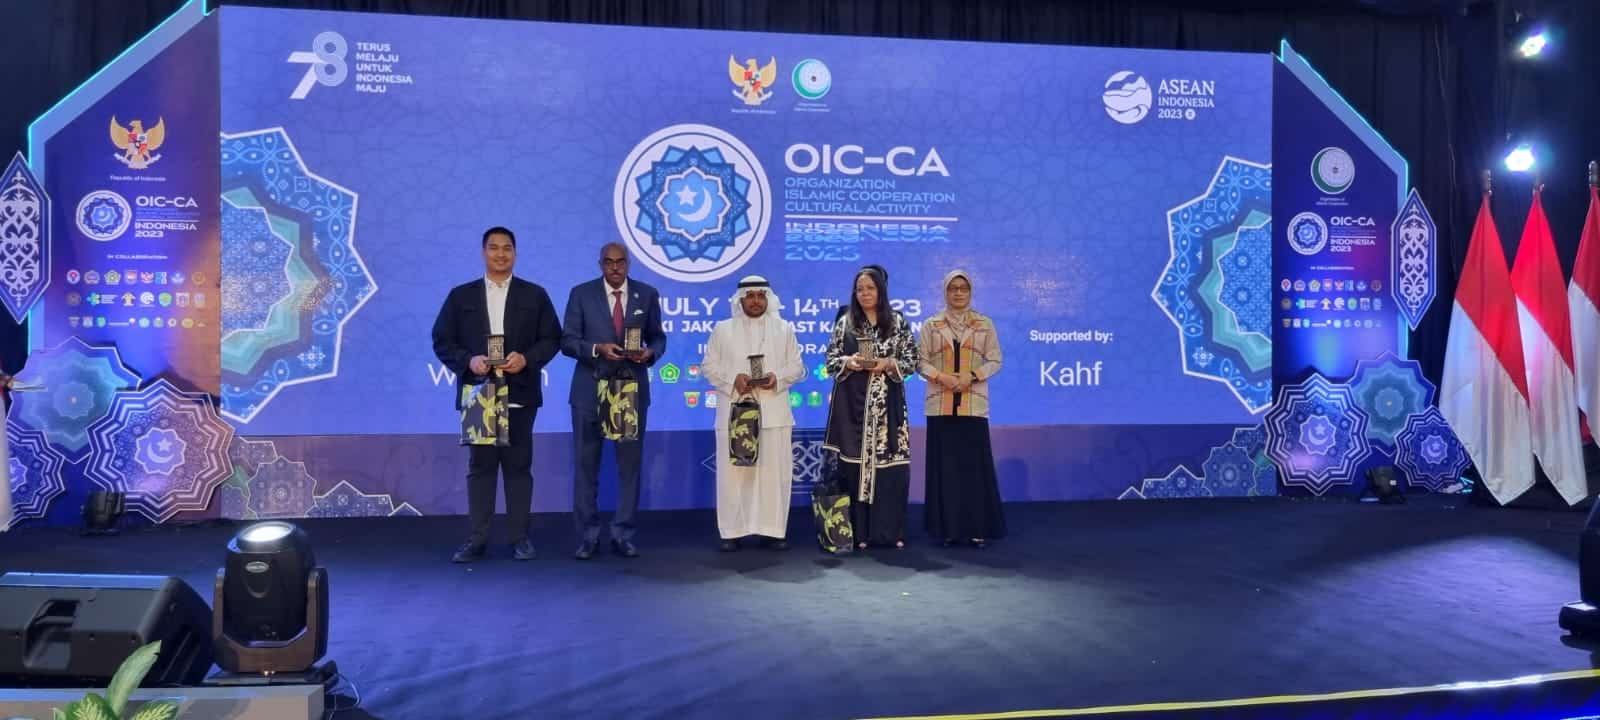 Opening ceremony of the Organization of Islamic Cooperation Cultural Activity (OIC-CA) in Indonesia,